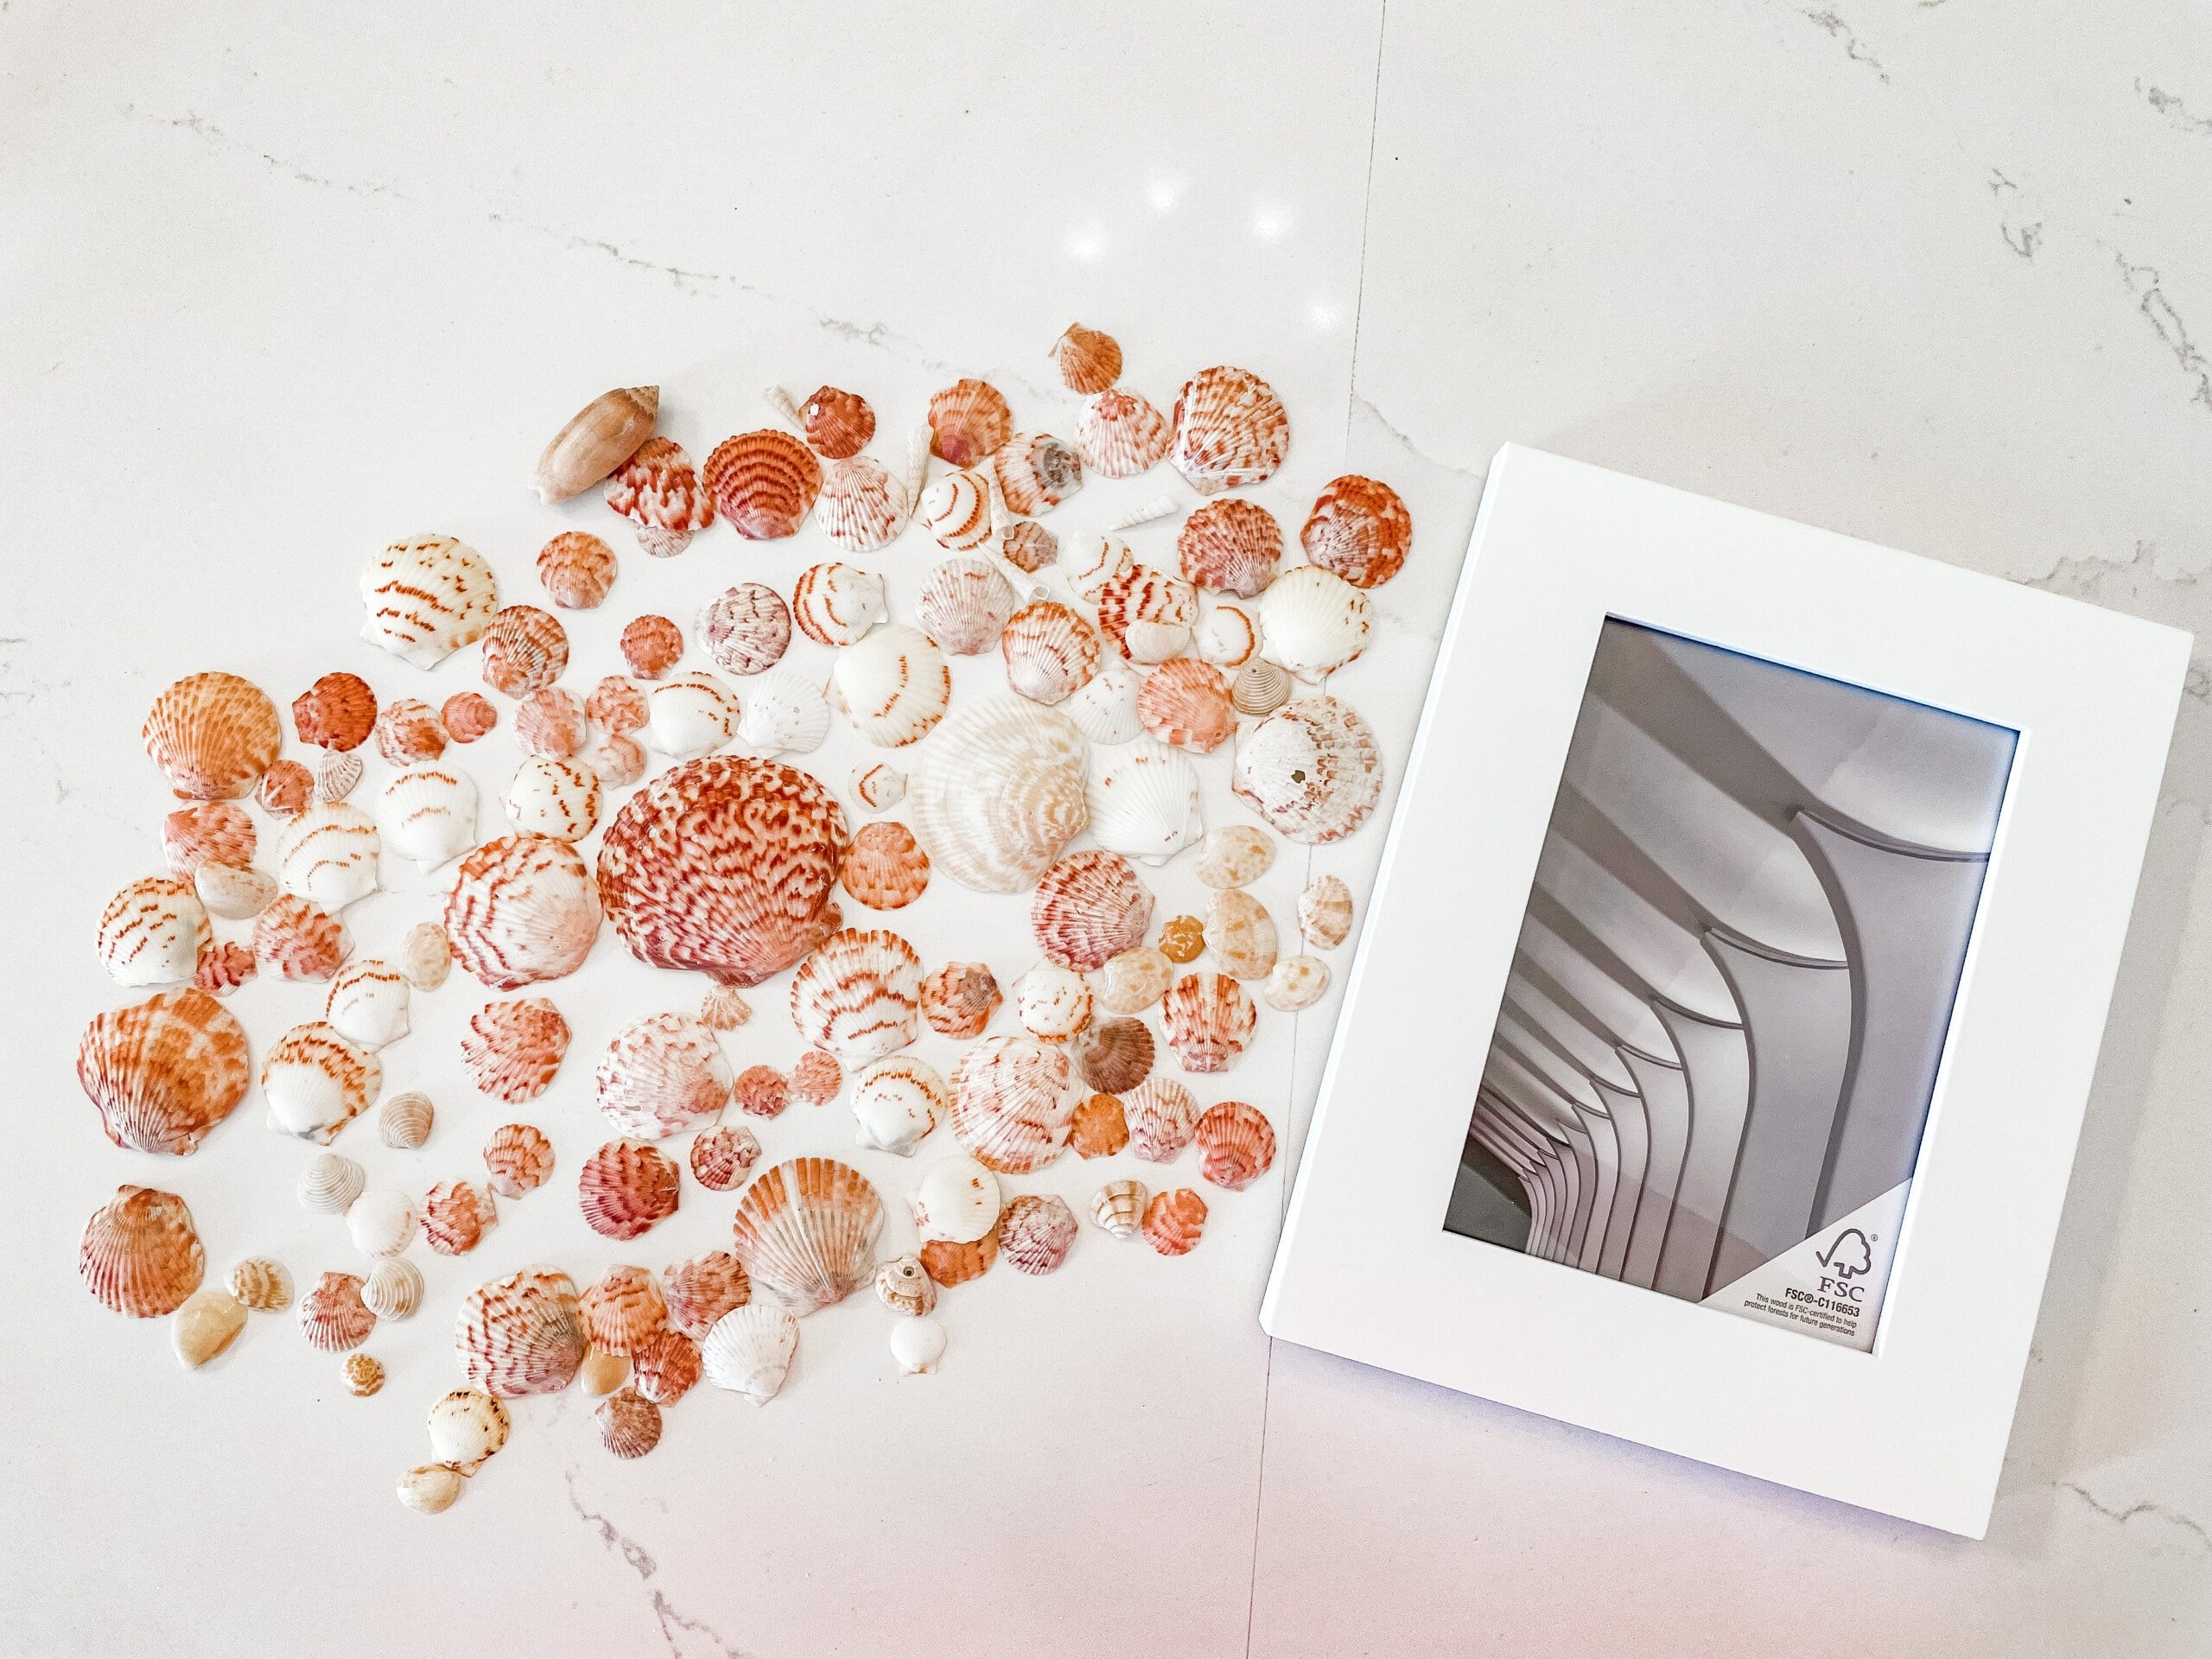 Seashells and a picture frame.